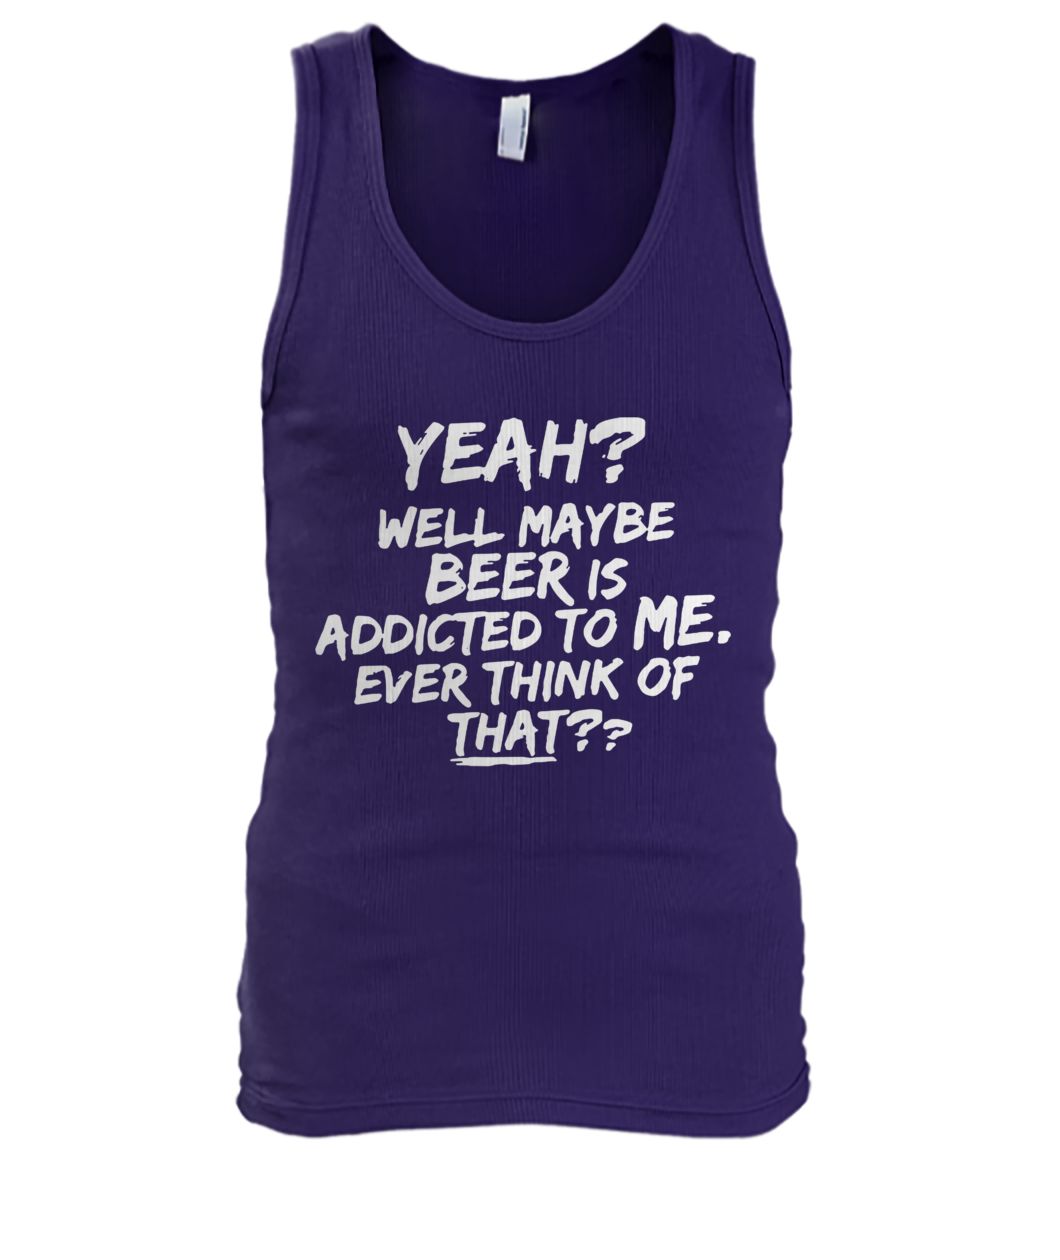 Yeah well maybe beer is addicted to me ever think of that men's tank top